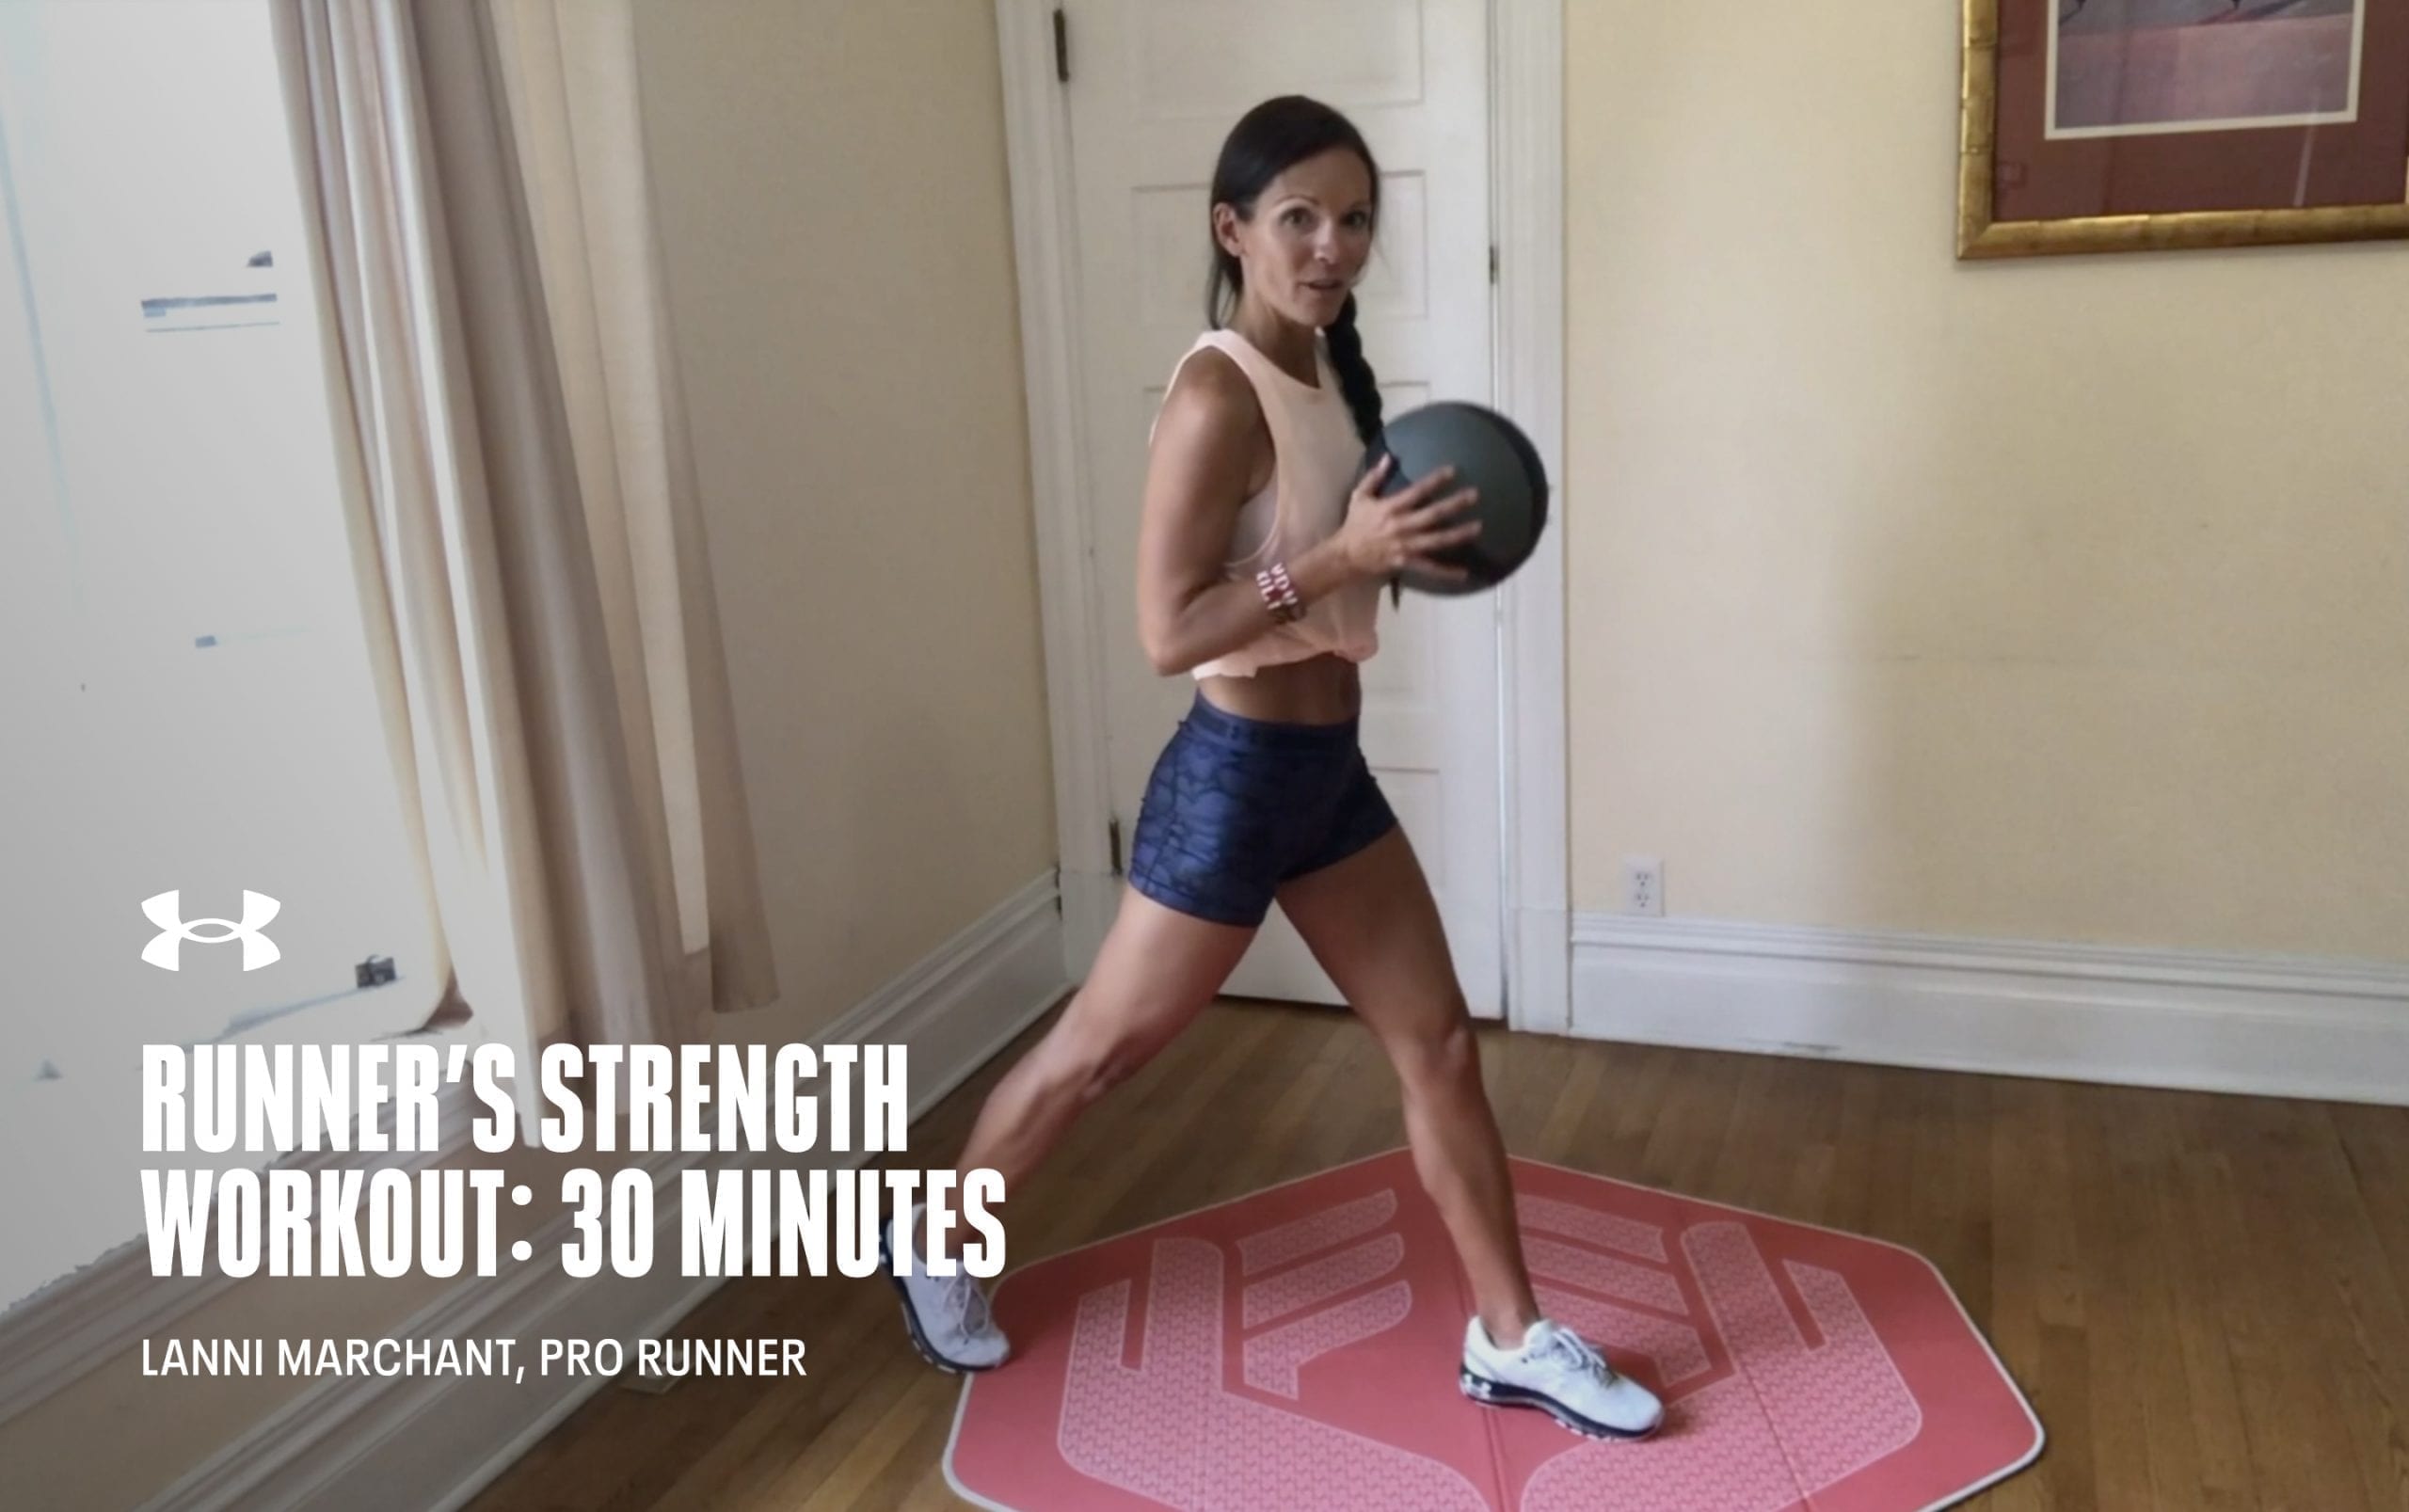 30 Minute Runner’s Strength Workout with Lanni Marchant